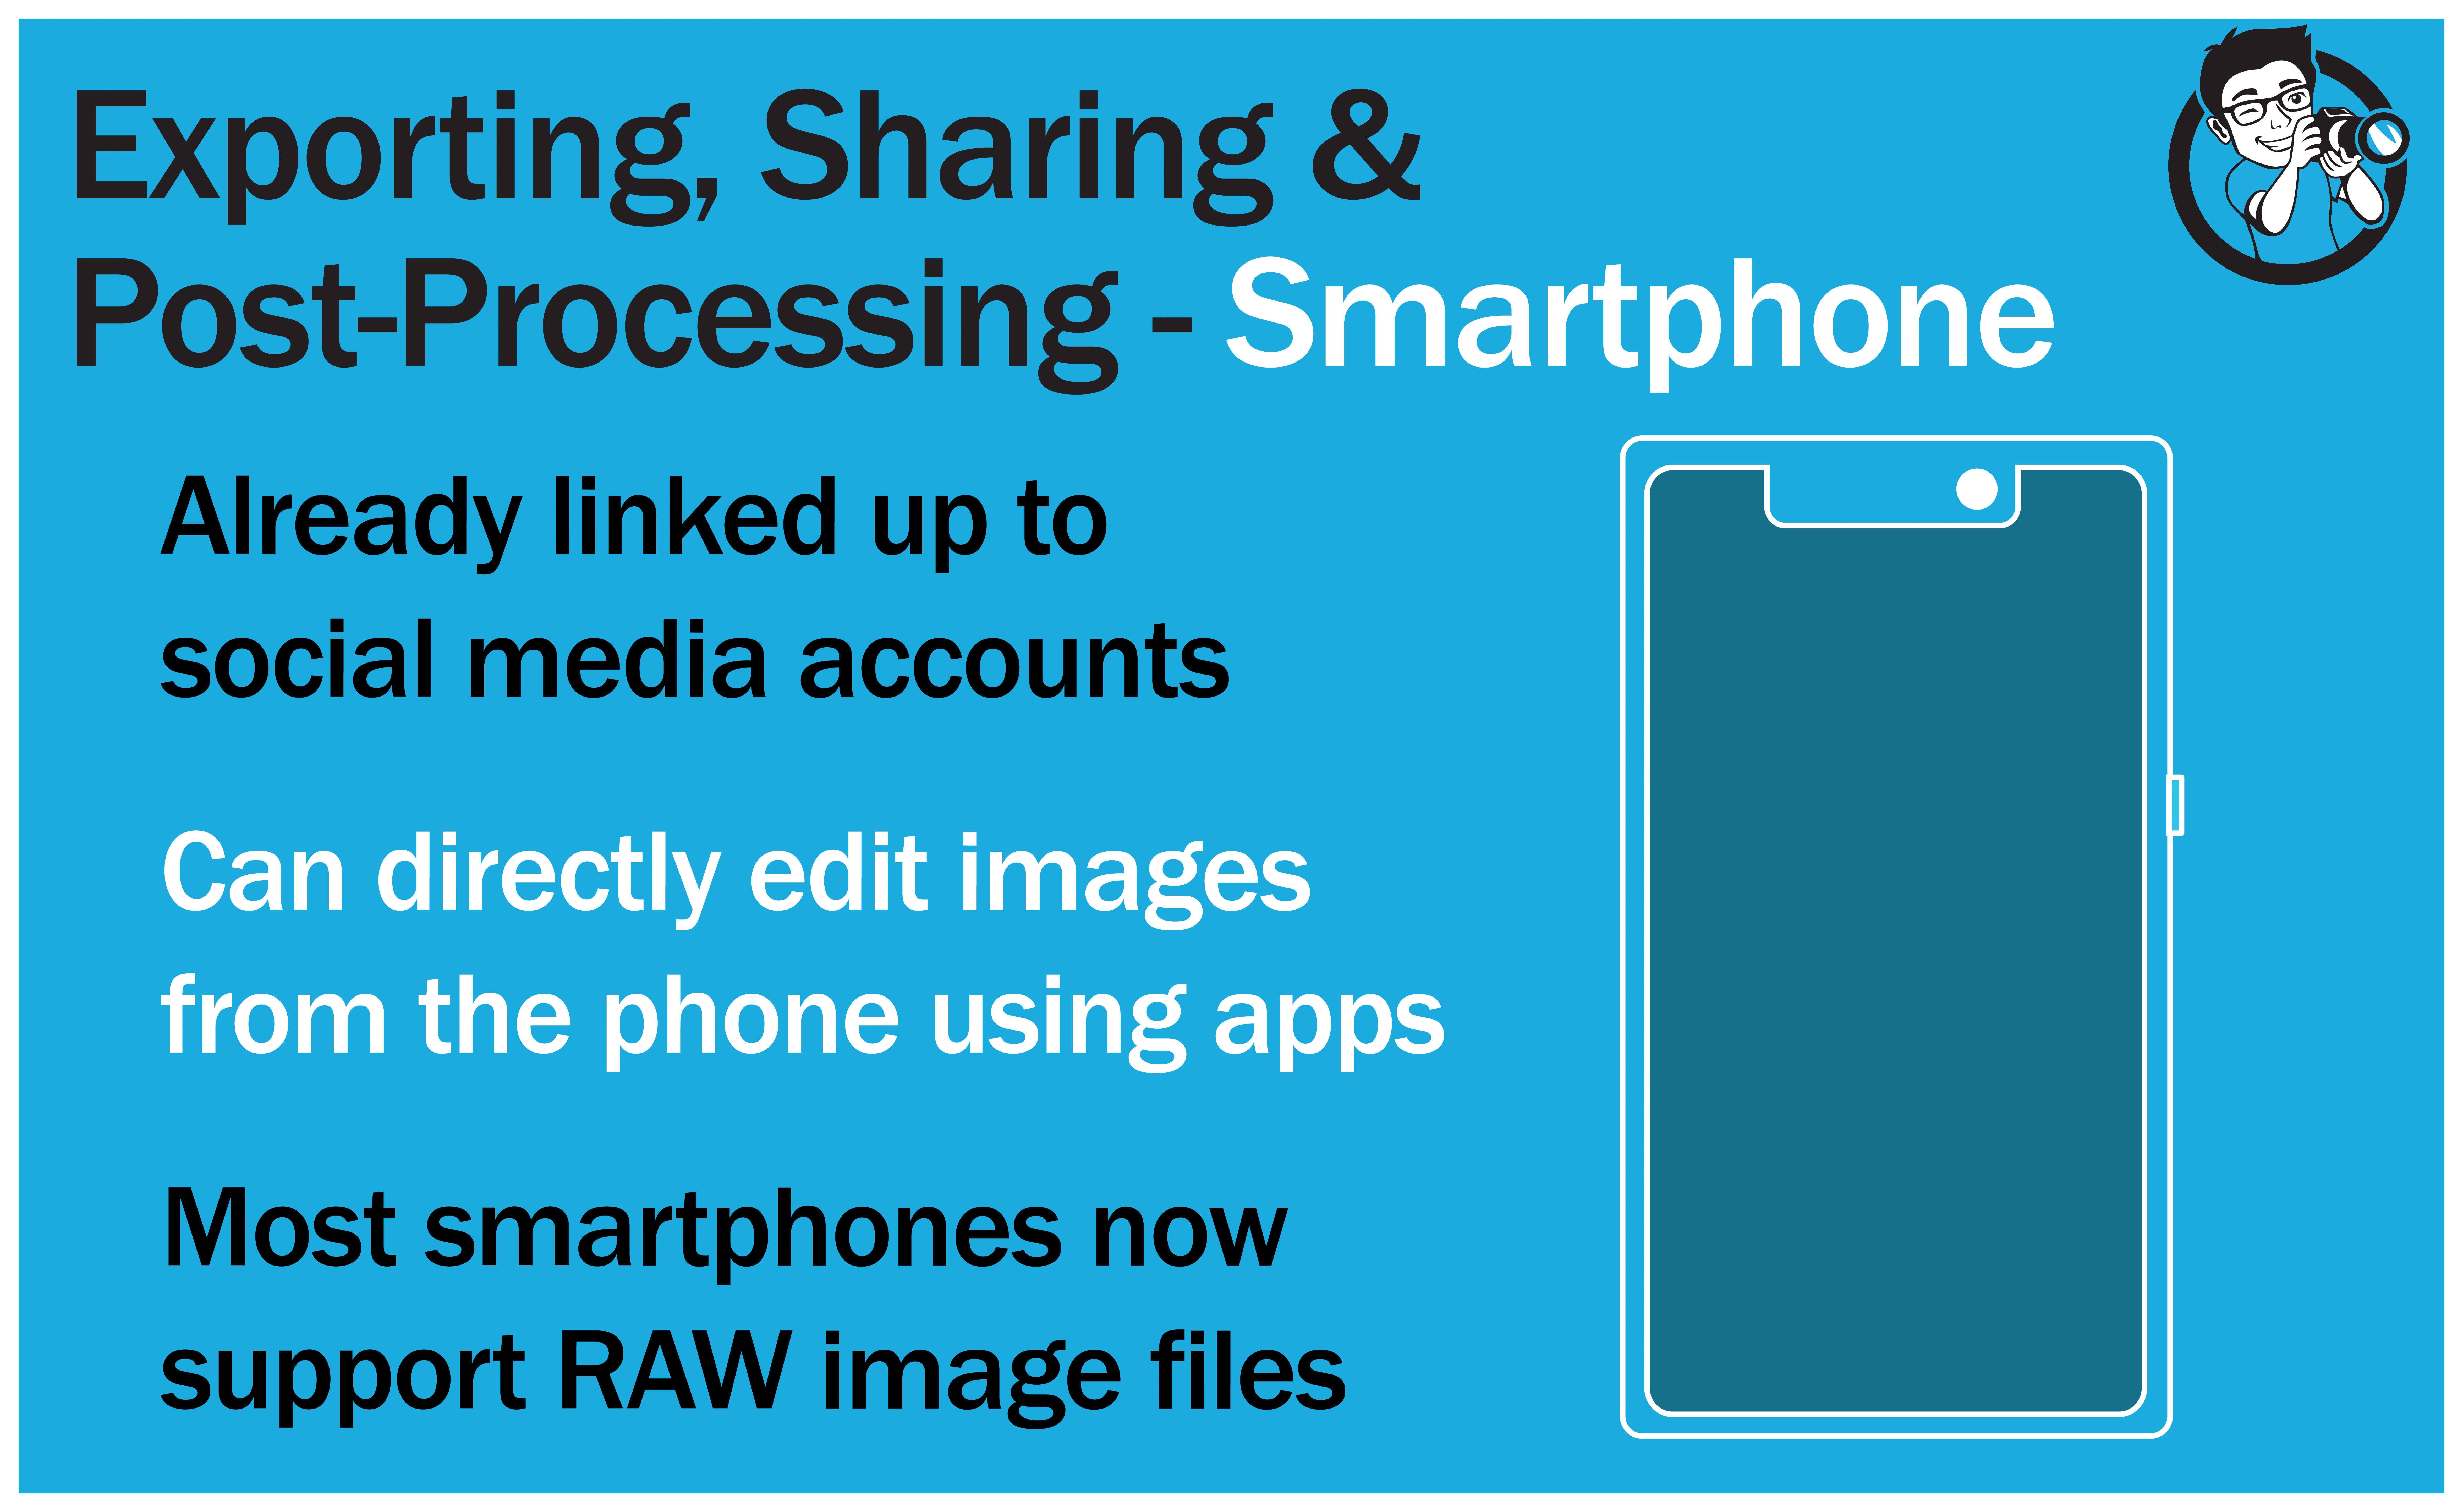 smartphone exporting sharing post processing